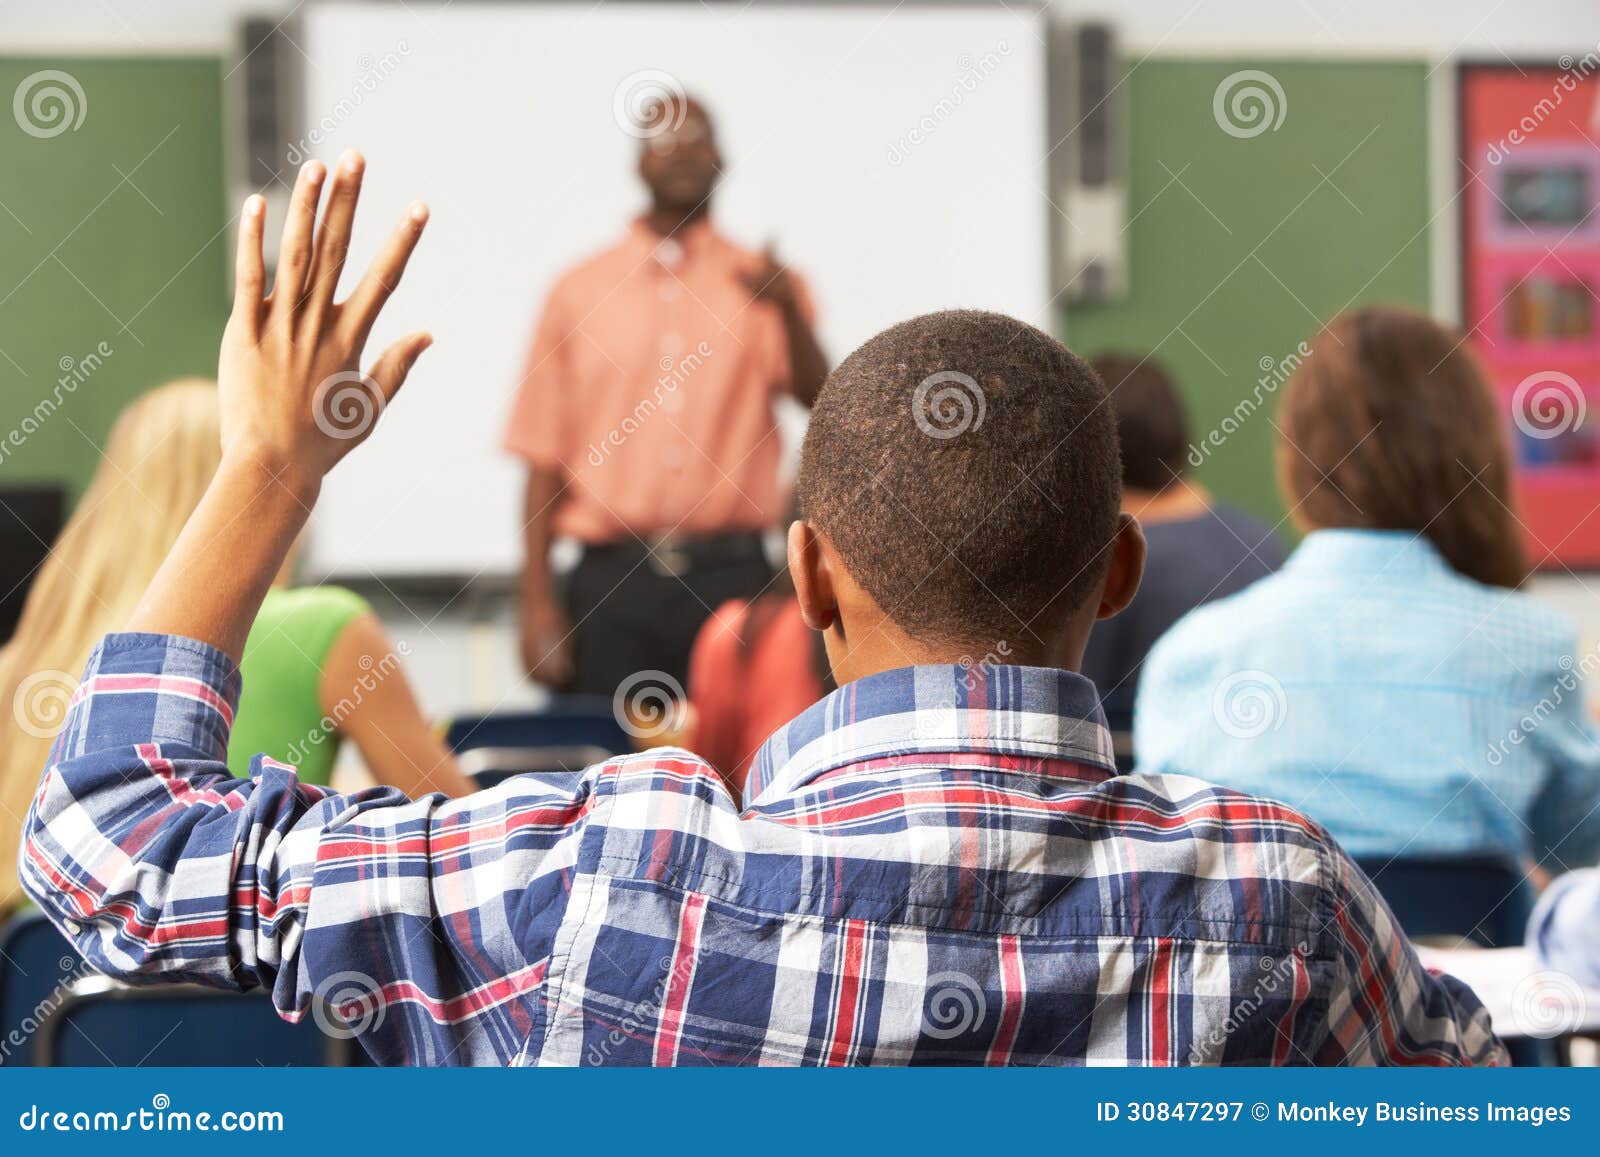 male pupil raising hand in class